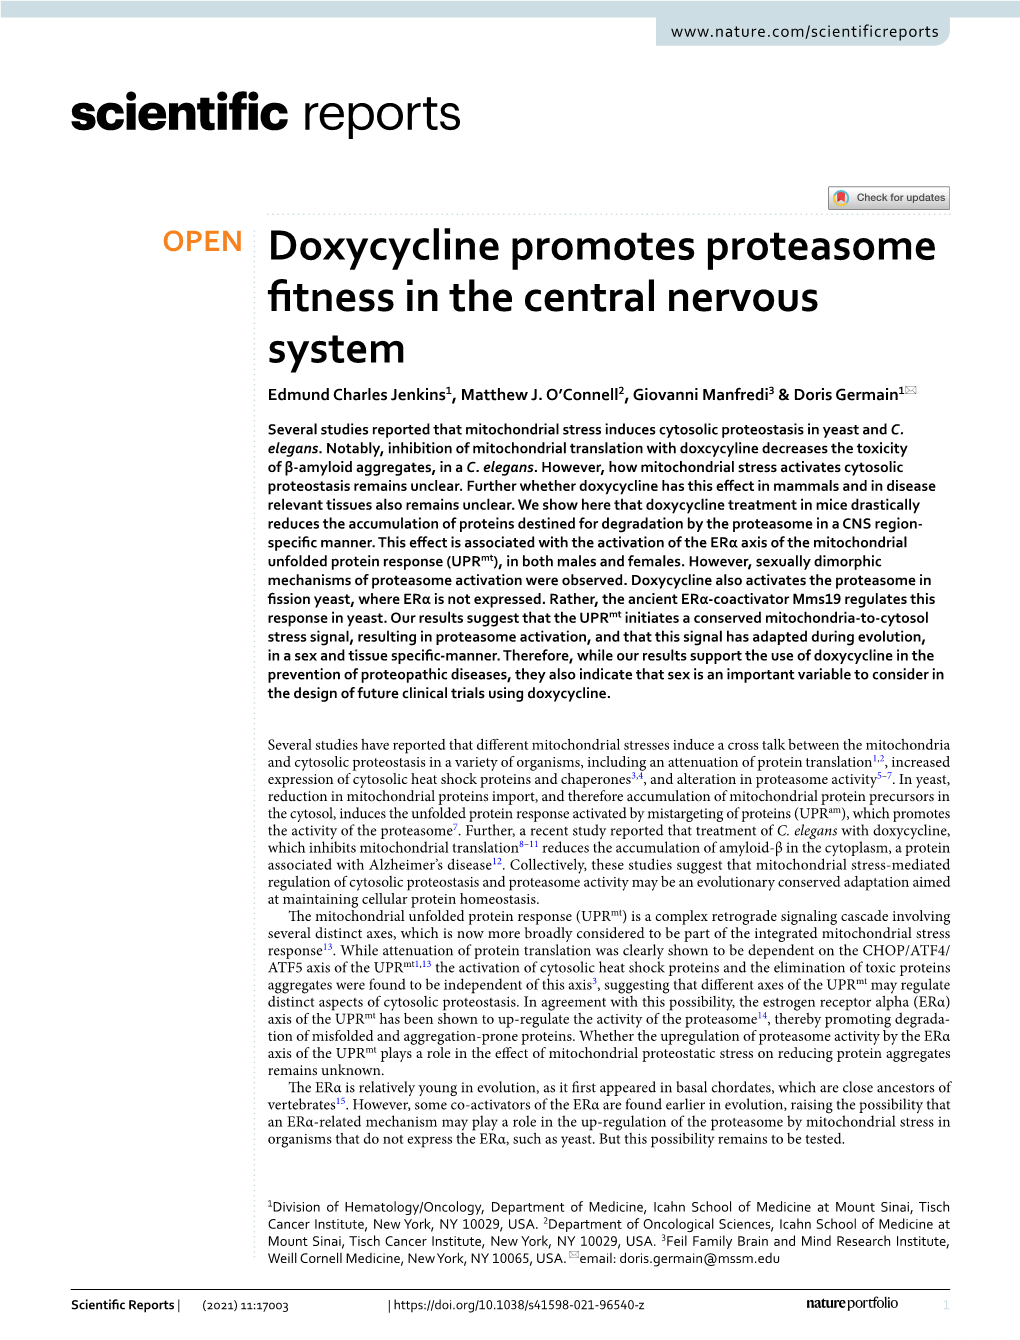 Doxycycline Promotes Proteasome Fitness in the Central Nervous System